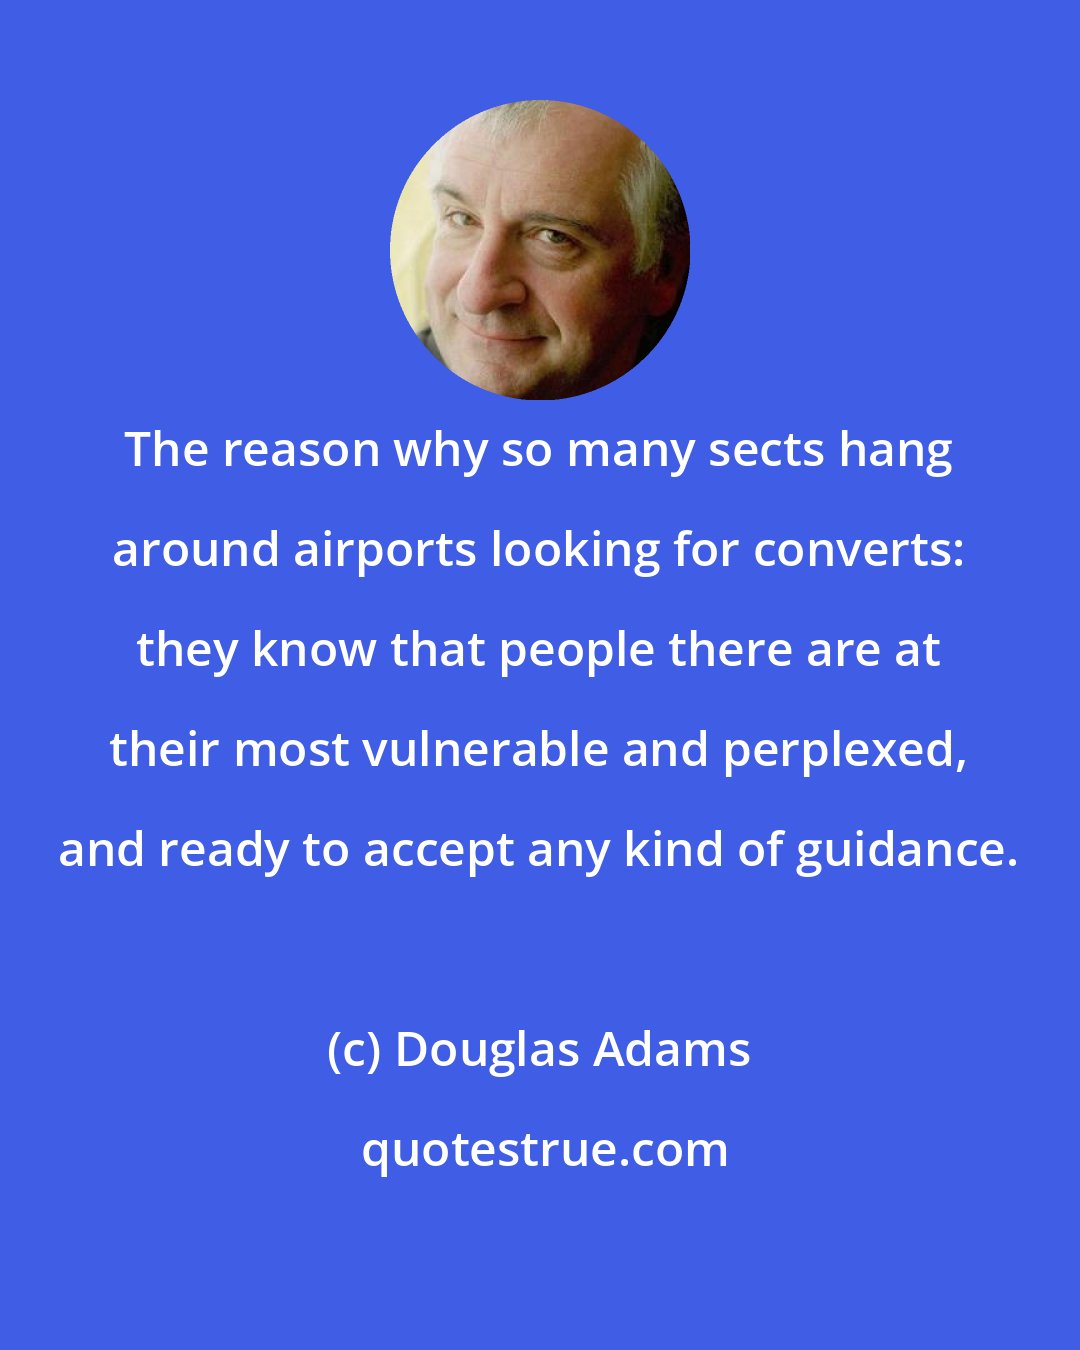 Douglas Adams: The reason why so many sects hang around airports looking for converts: they know that people there are at their most vulnerable and perplexed, and ready to accept any kind of guidance.